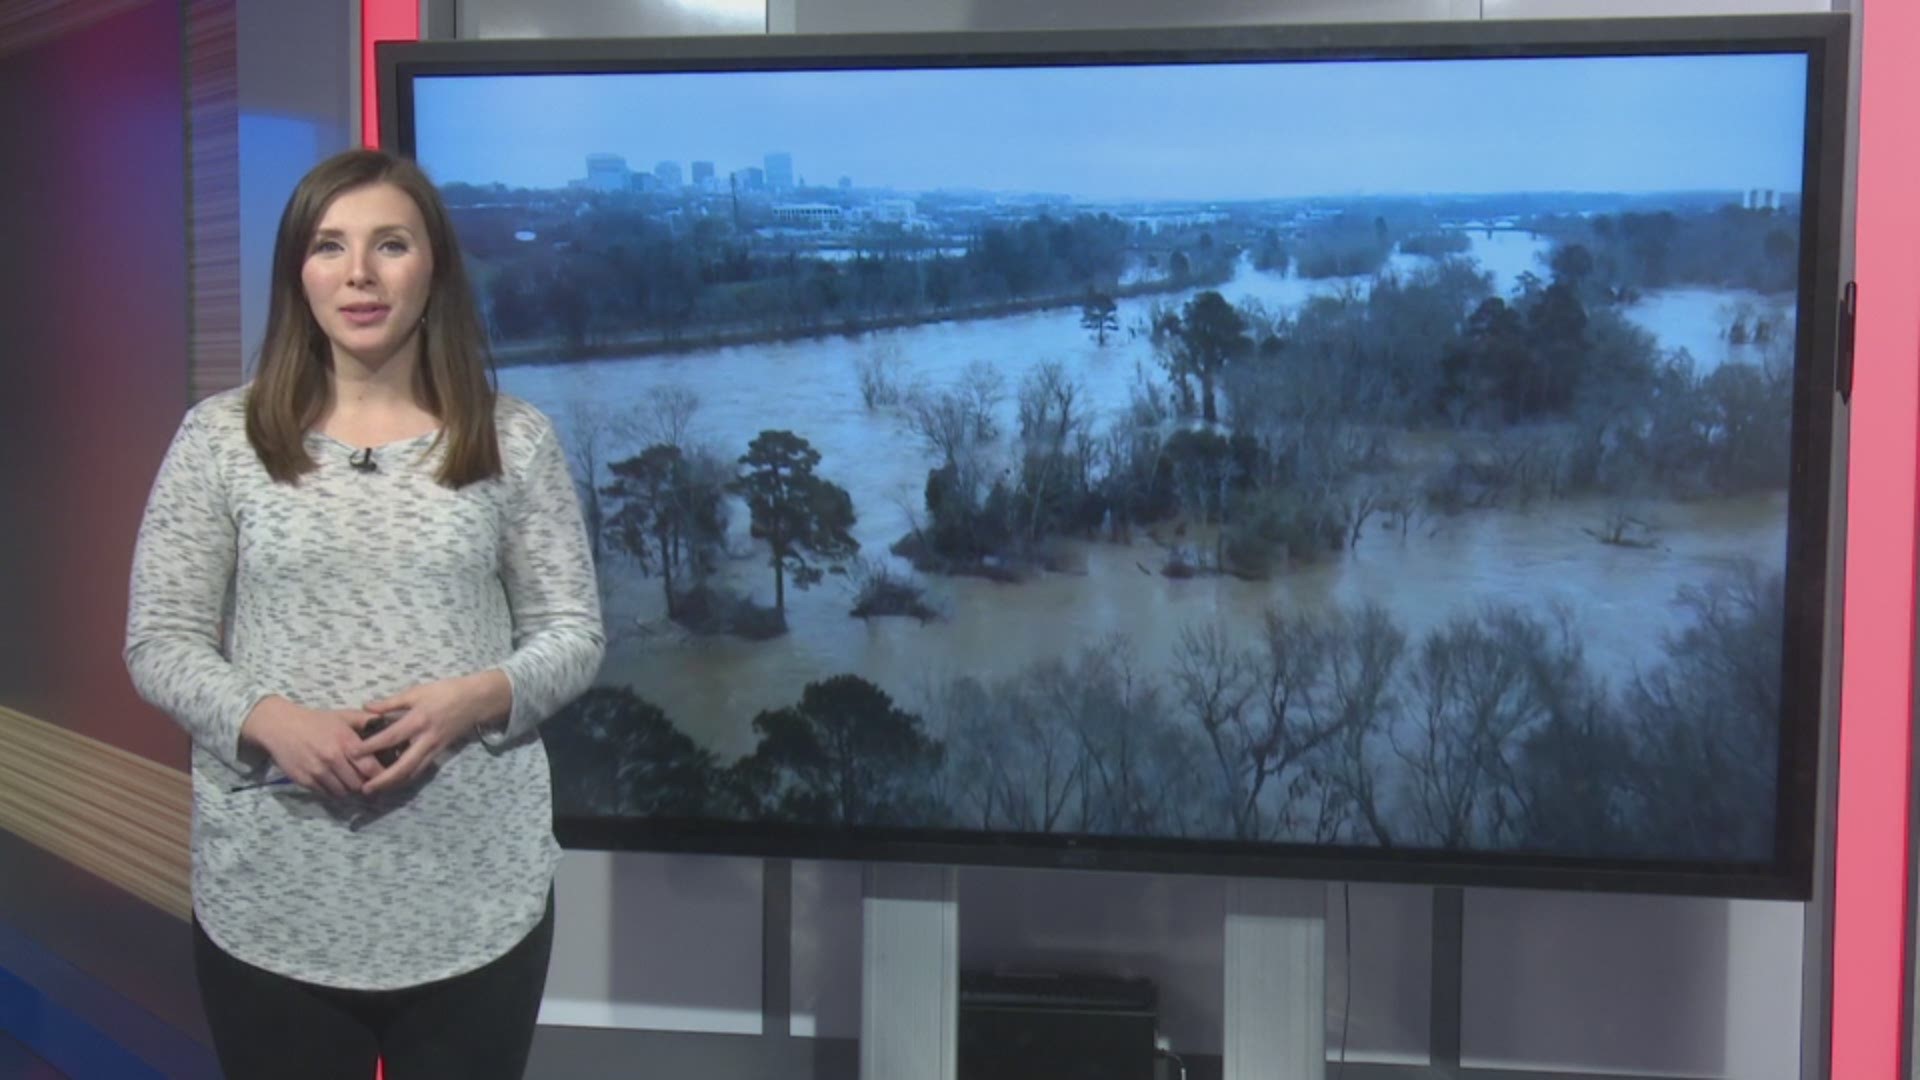 This winter has been the wettest in recorded history here in Columbia. Meteorologist Danielle Miller explains the link between climate change and extreme weather.